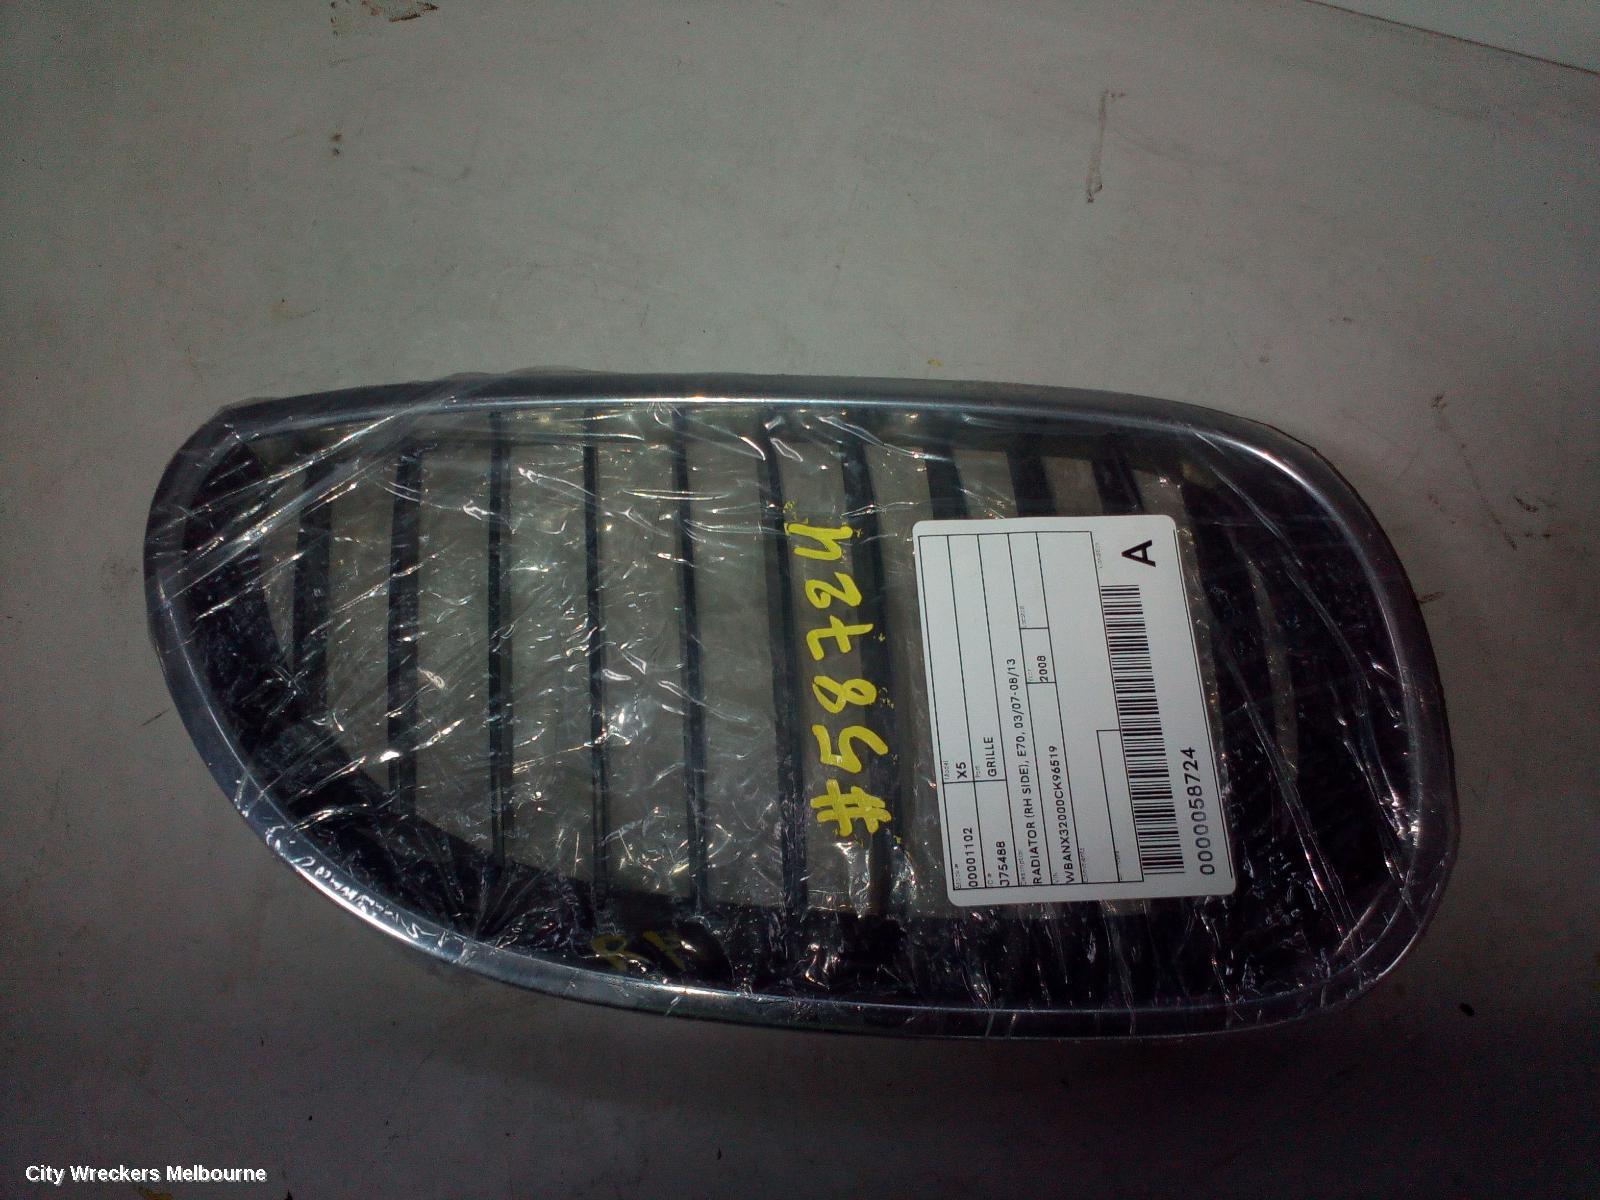 BMW 5 SERIES 2007 Grille